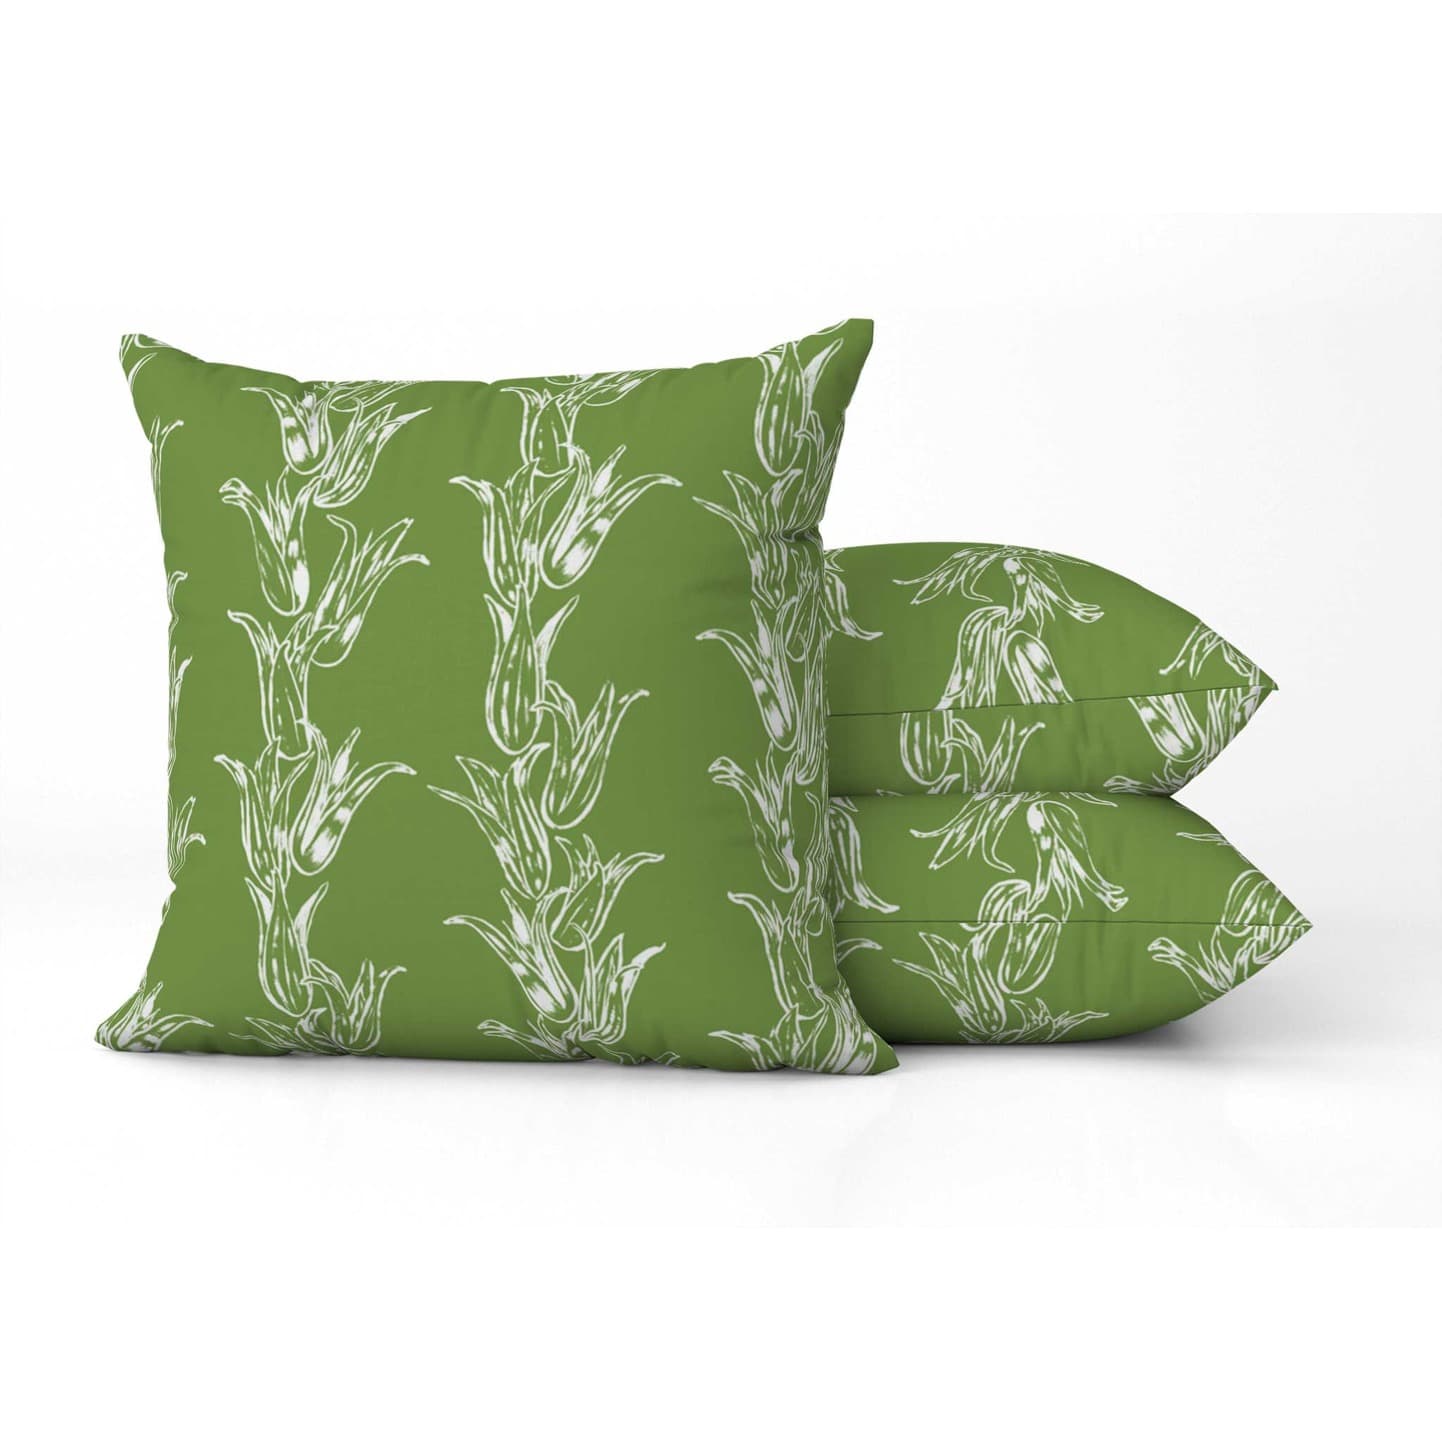 Lucille Square Pillow in Grass